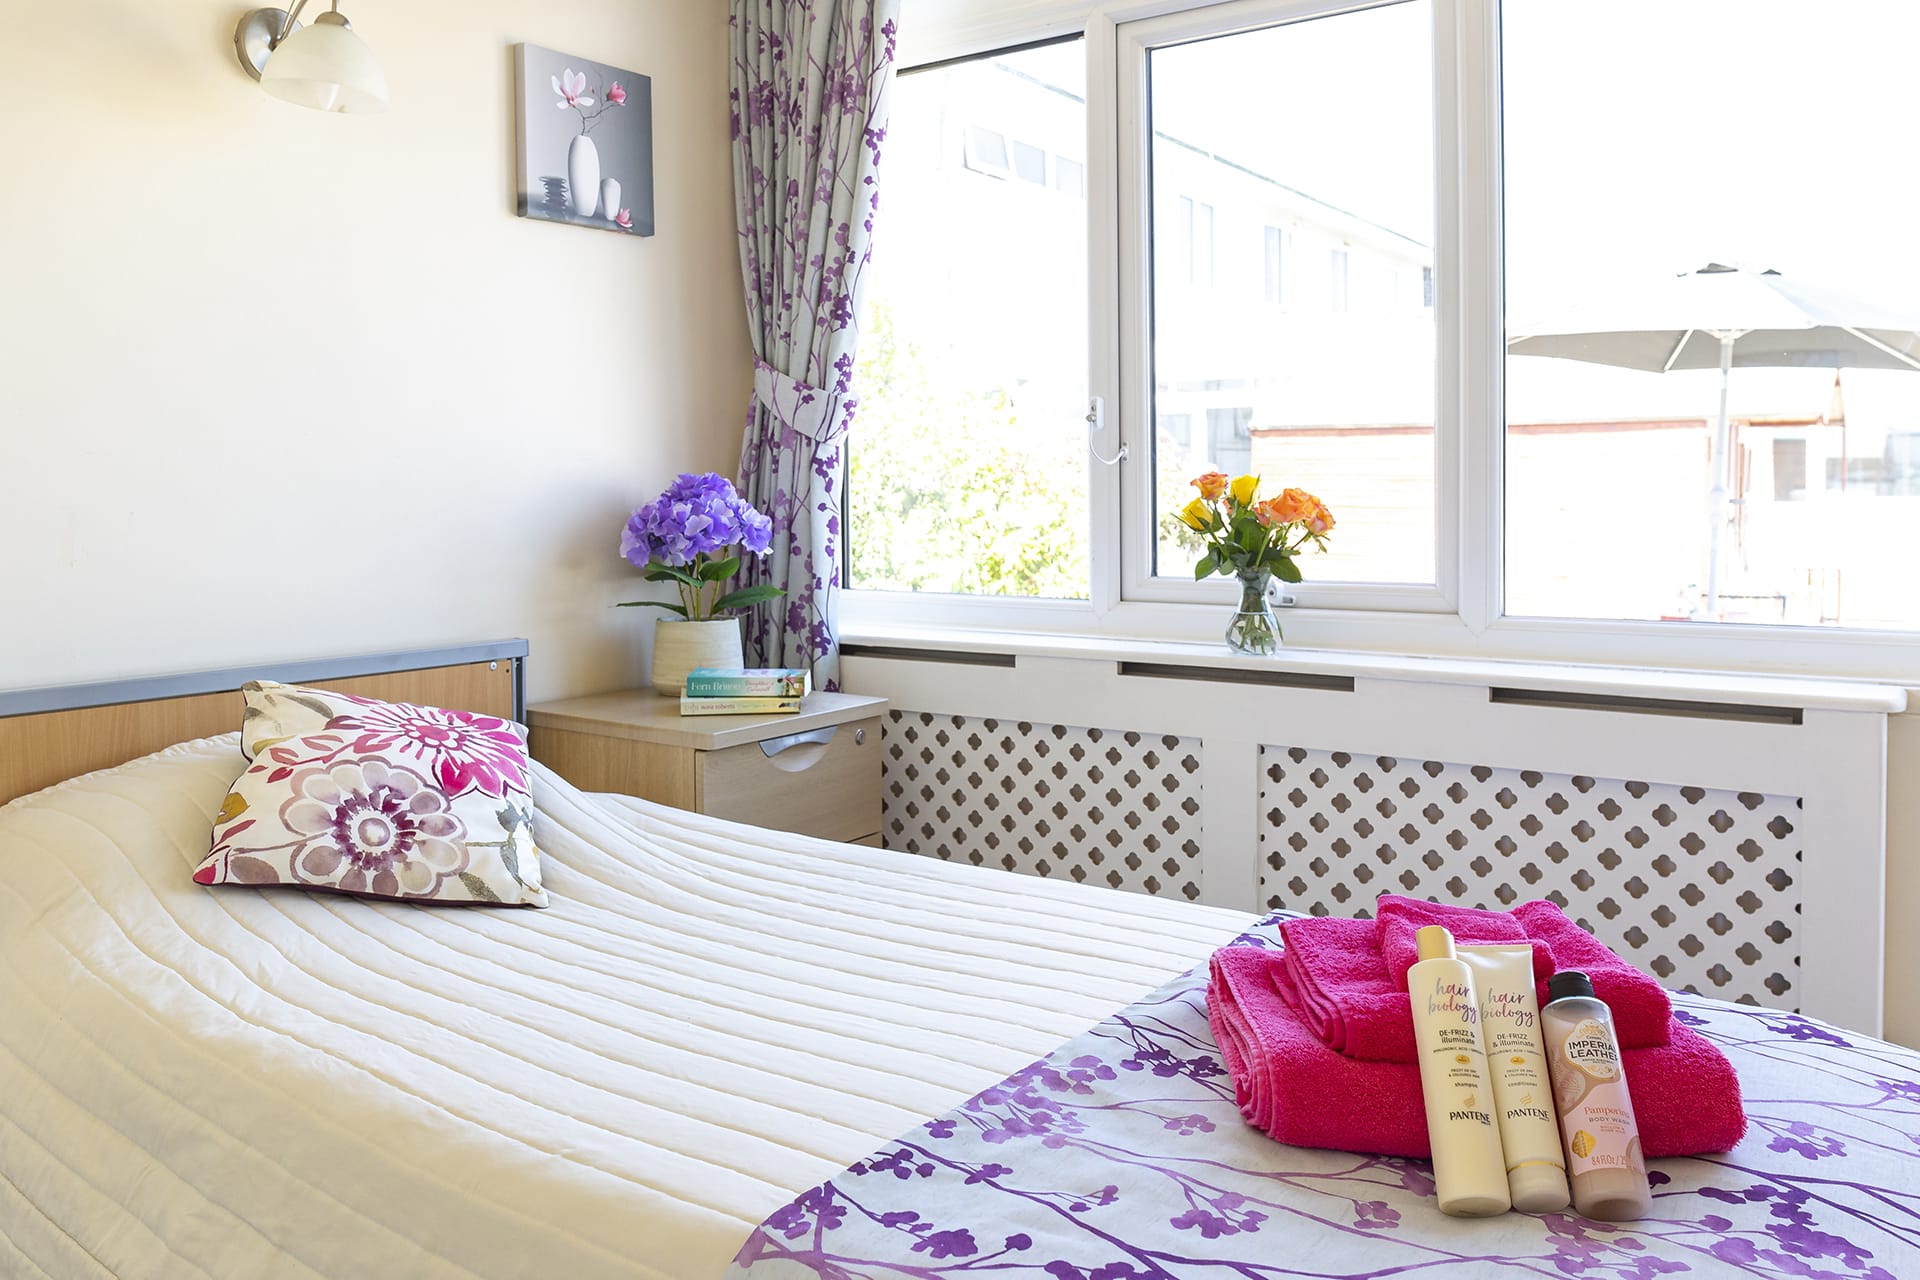 Garden view bedroom at Cavell House Care Home in Shoreham-by-Sea.